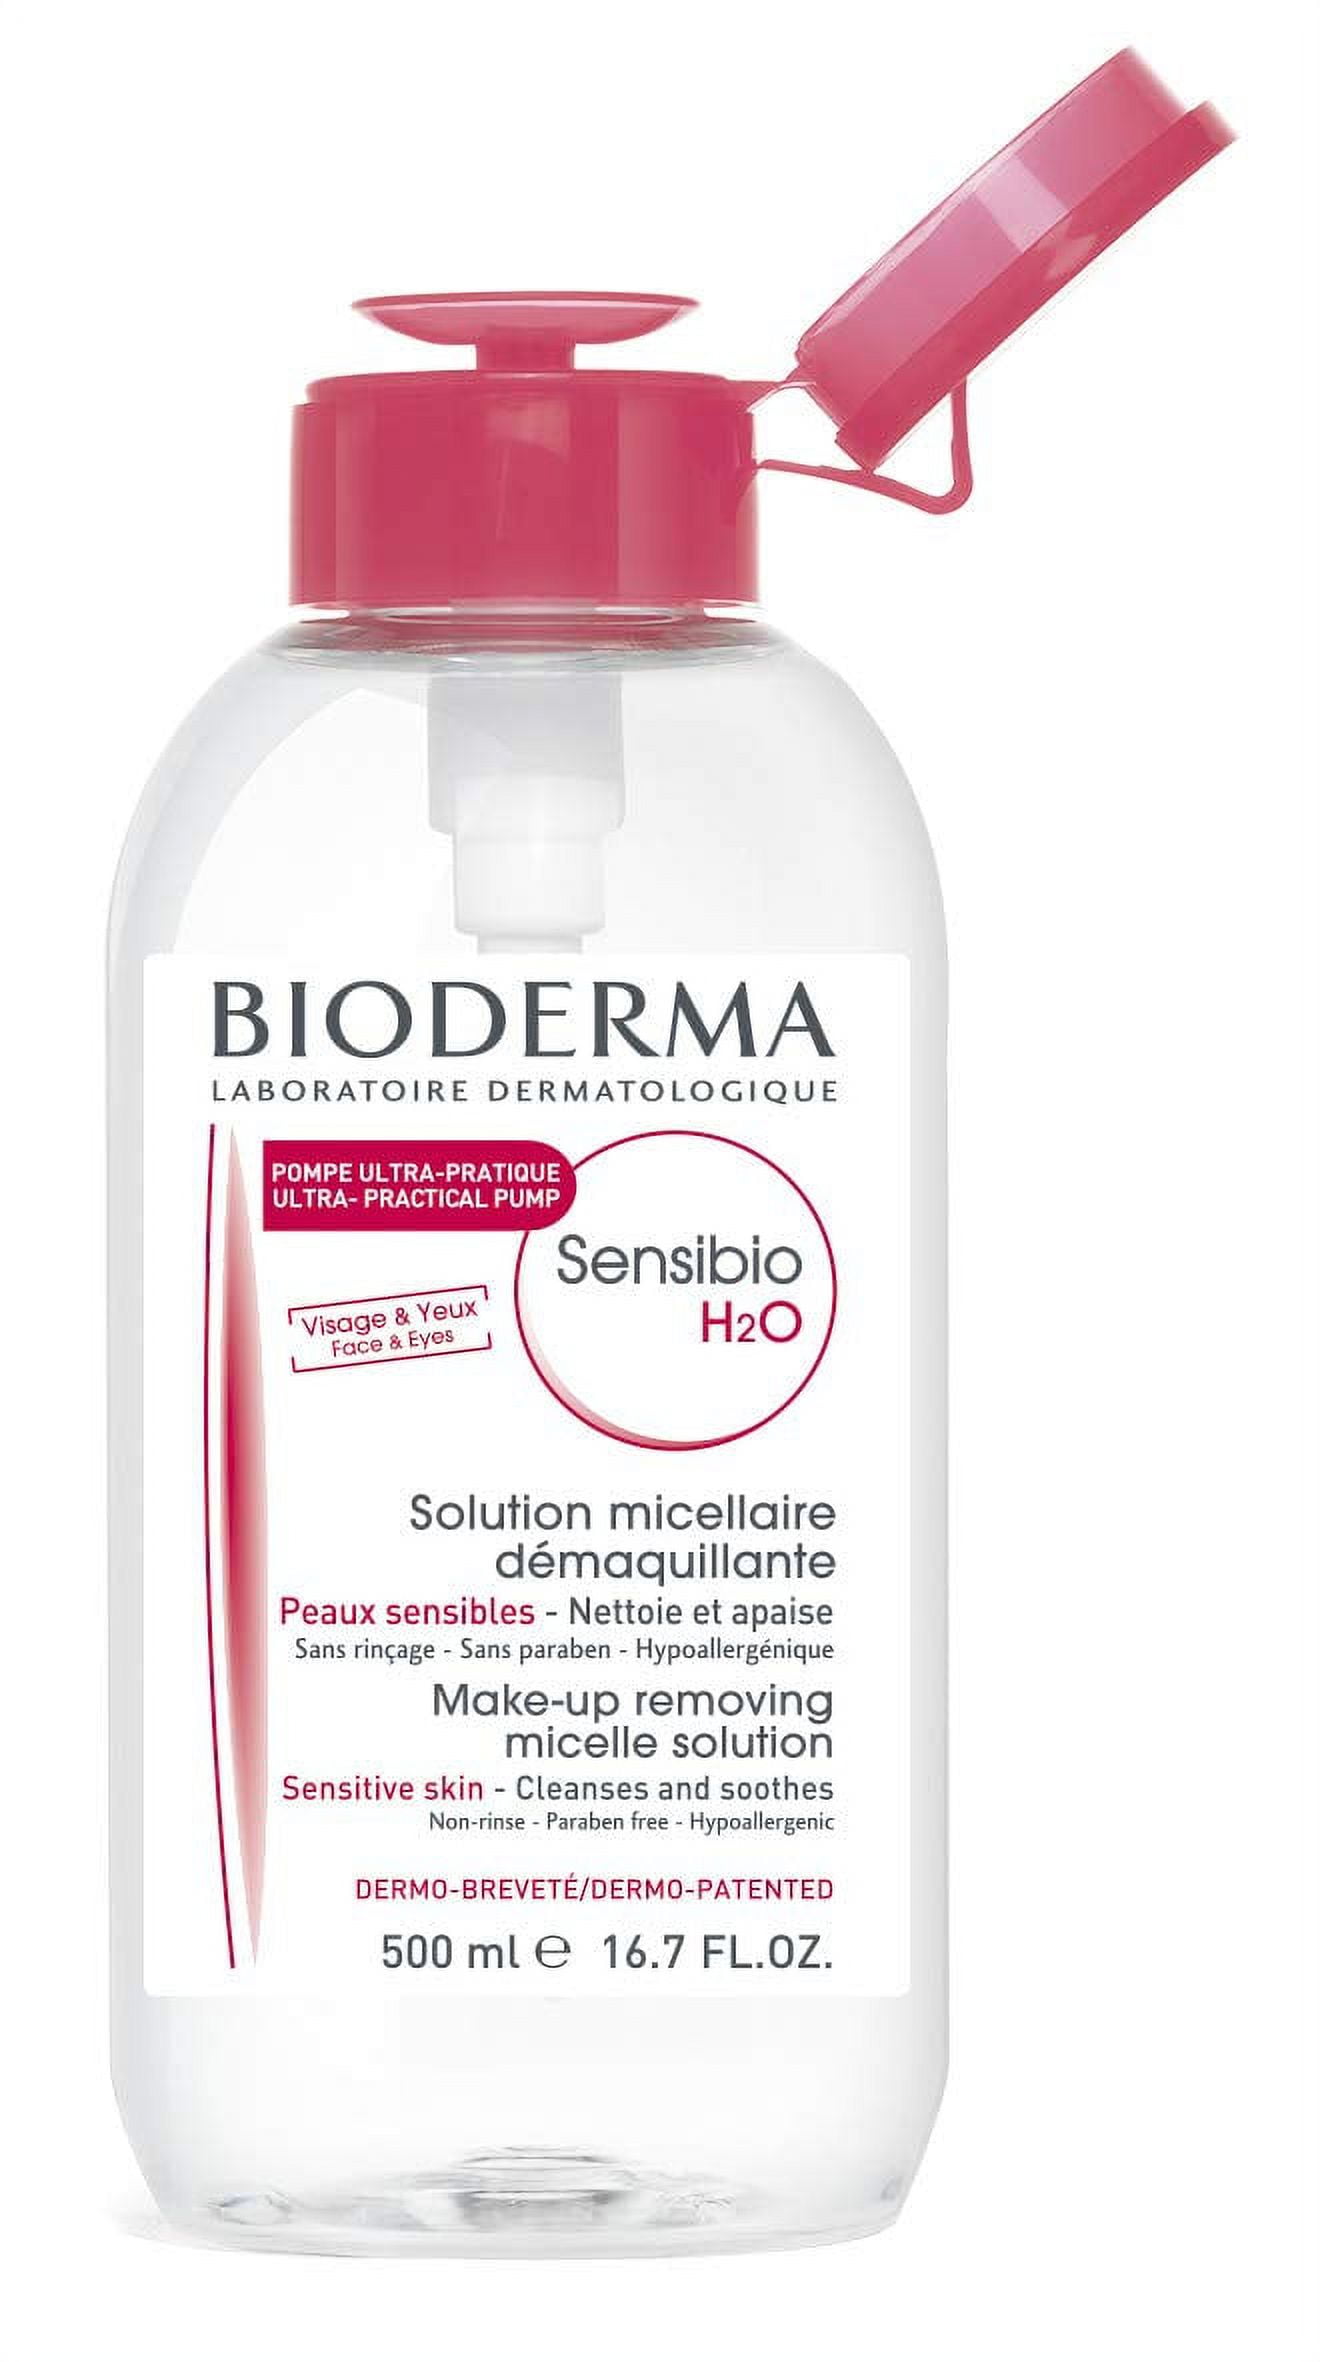 Bioderma Sensibio H2O Soothing Micellar Cleansing Water and Makeup Removing Solution for Sensitive Skin - Face and Eyes - Reversed Pump 16.7 fl.oz. image